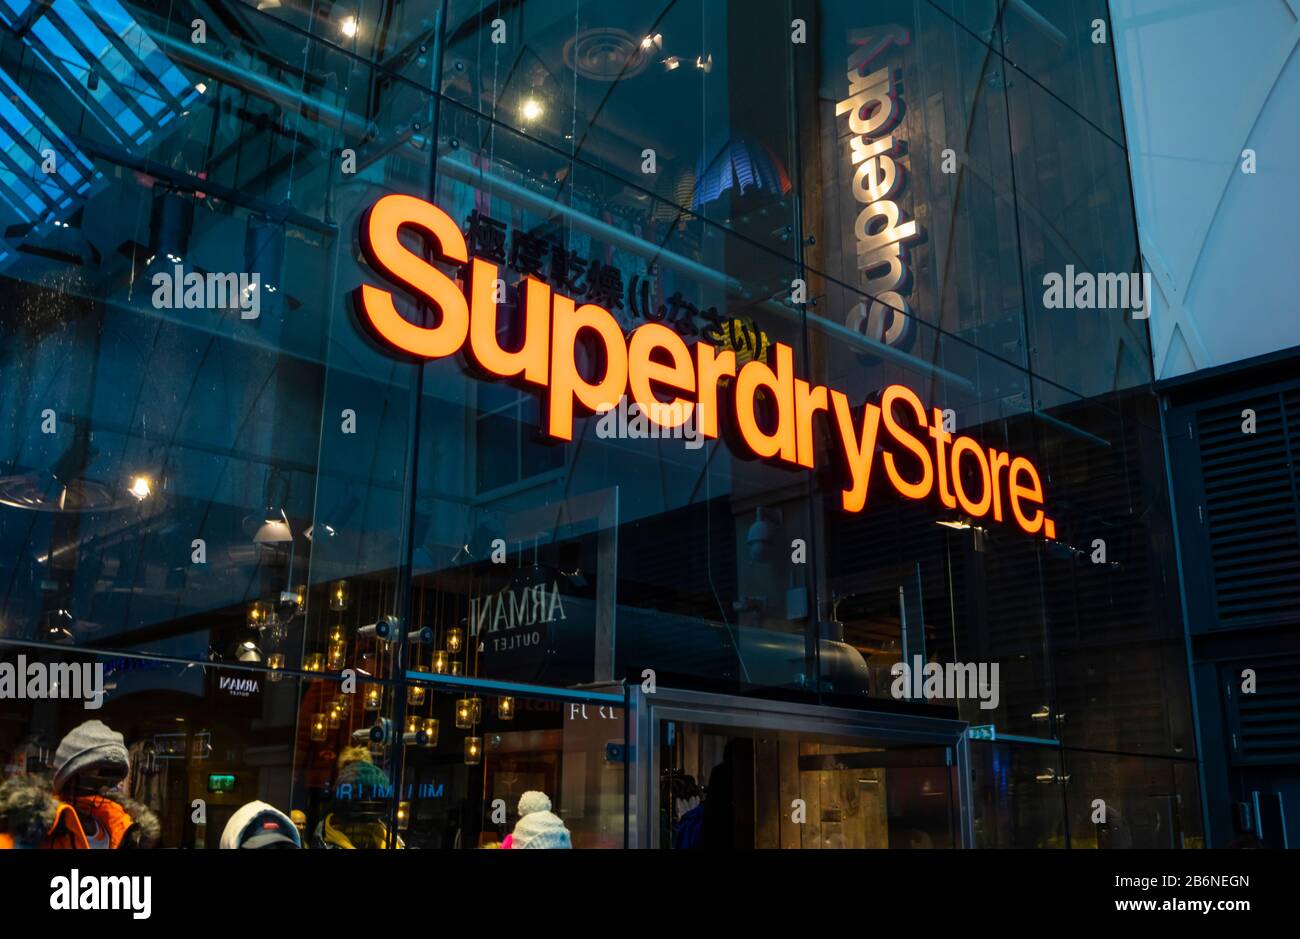 Superdry Clothing Clothes Brand High Resolution Stock Photography and  Images - Alamy